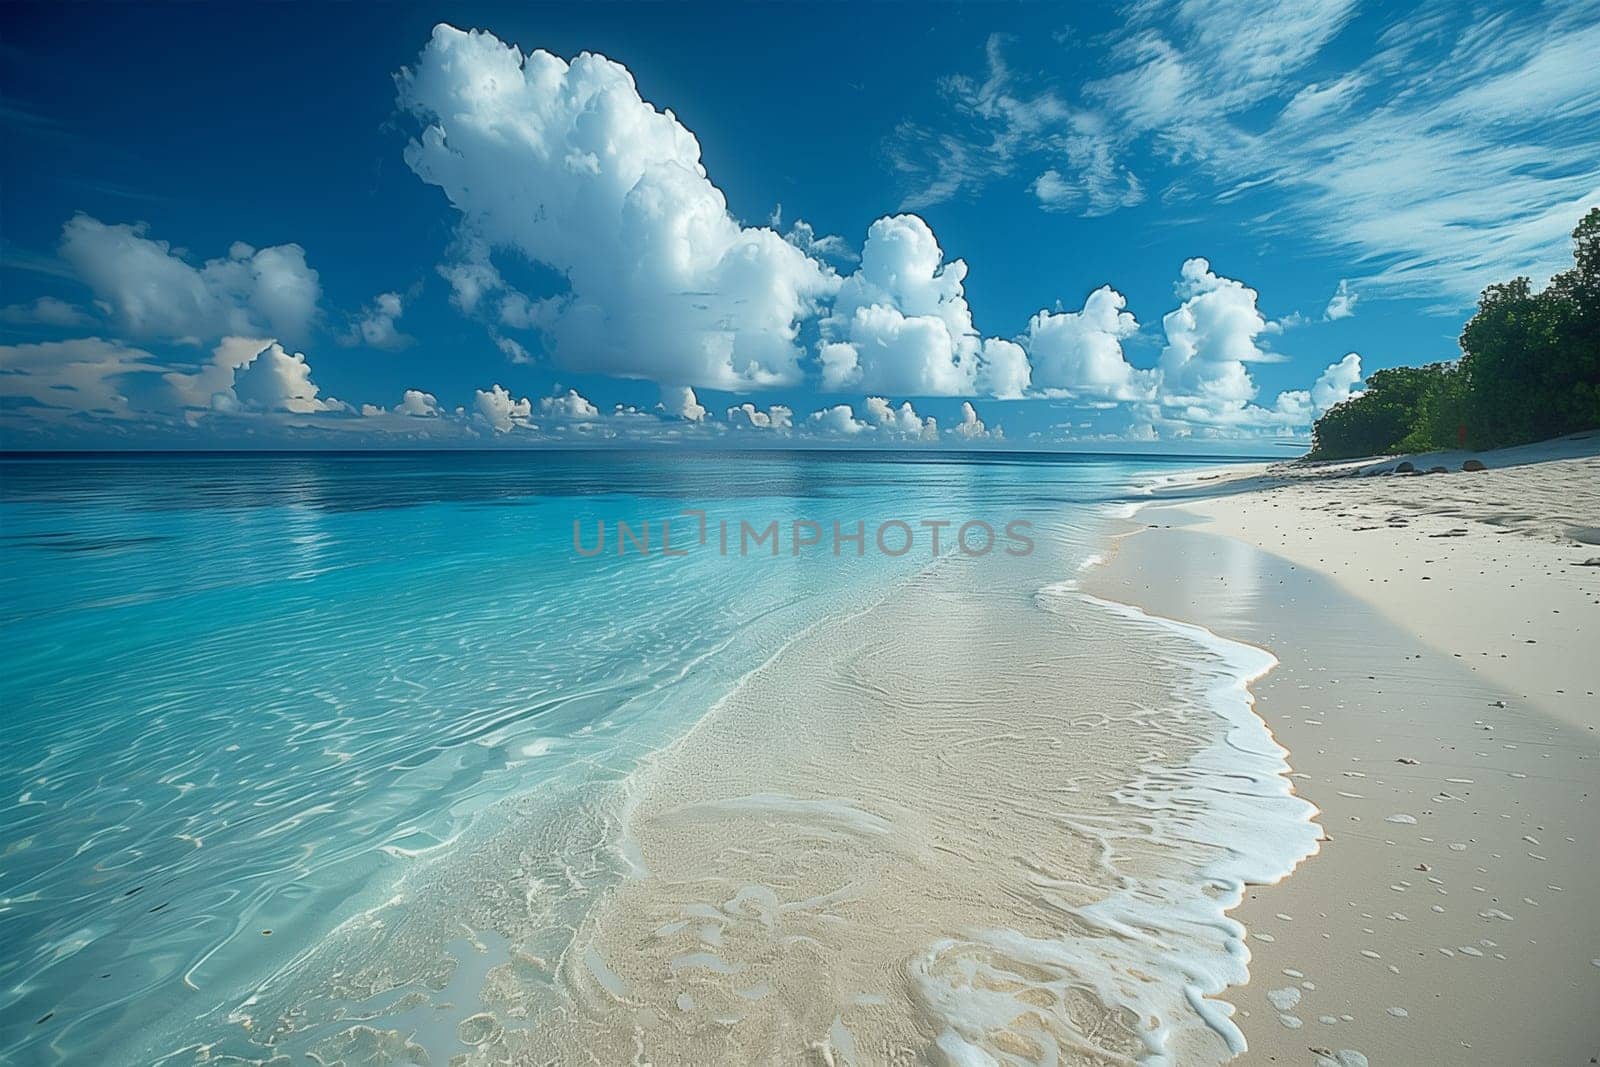 A sandy beach with crystal-clear blue water under a cloudy sky, creating a serene and natural scene.